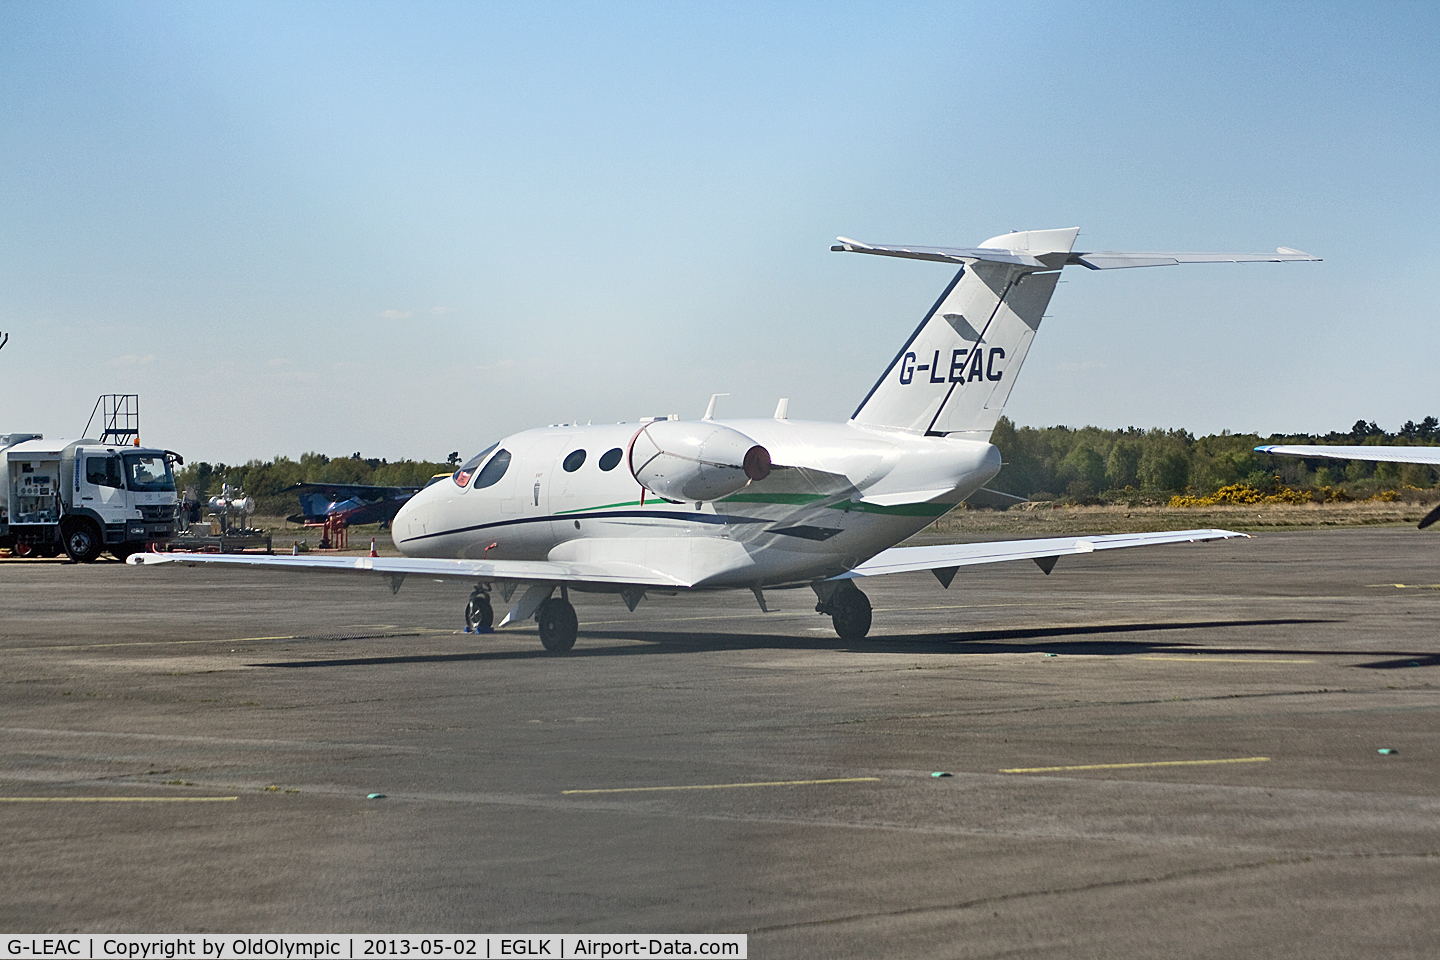 G-LEAC, 2008 Cessna 510 Citation Mustang Citation Mustang C/N 510-0075, Parked